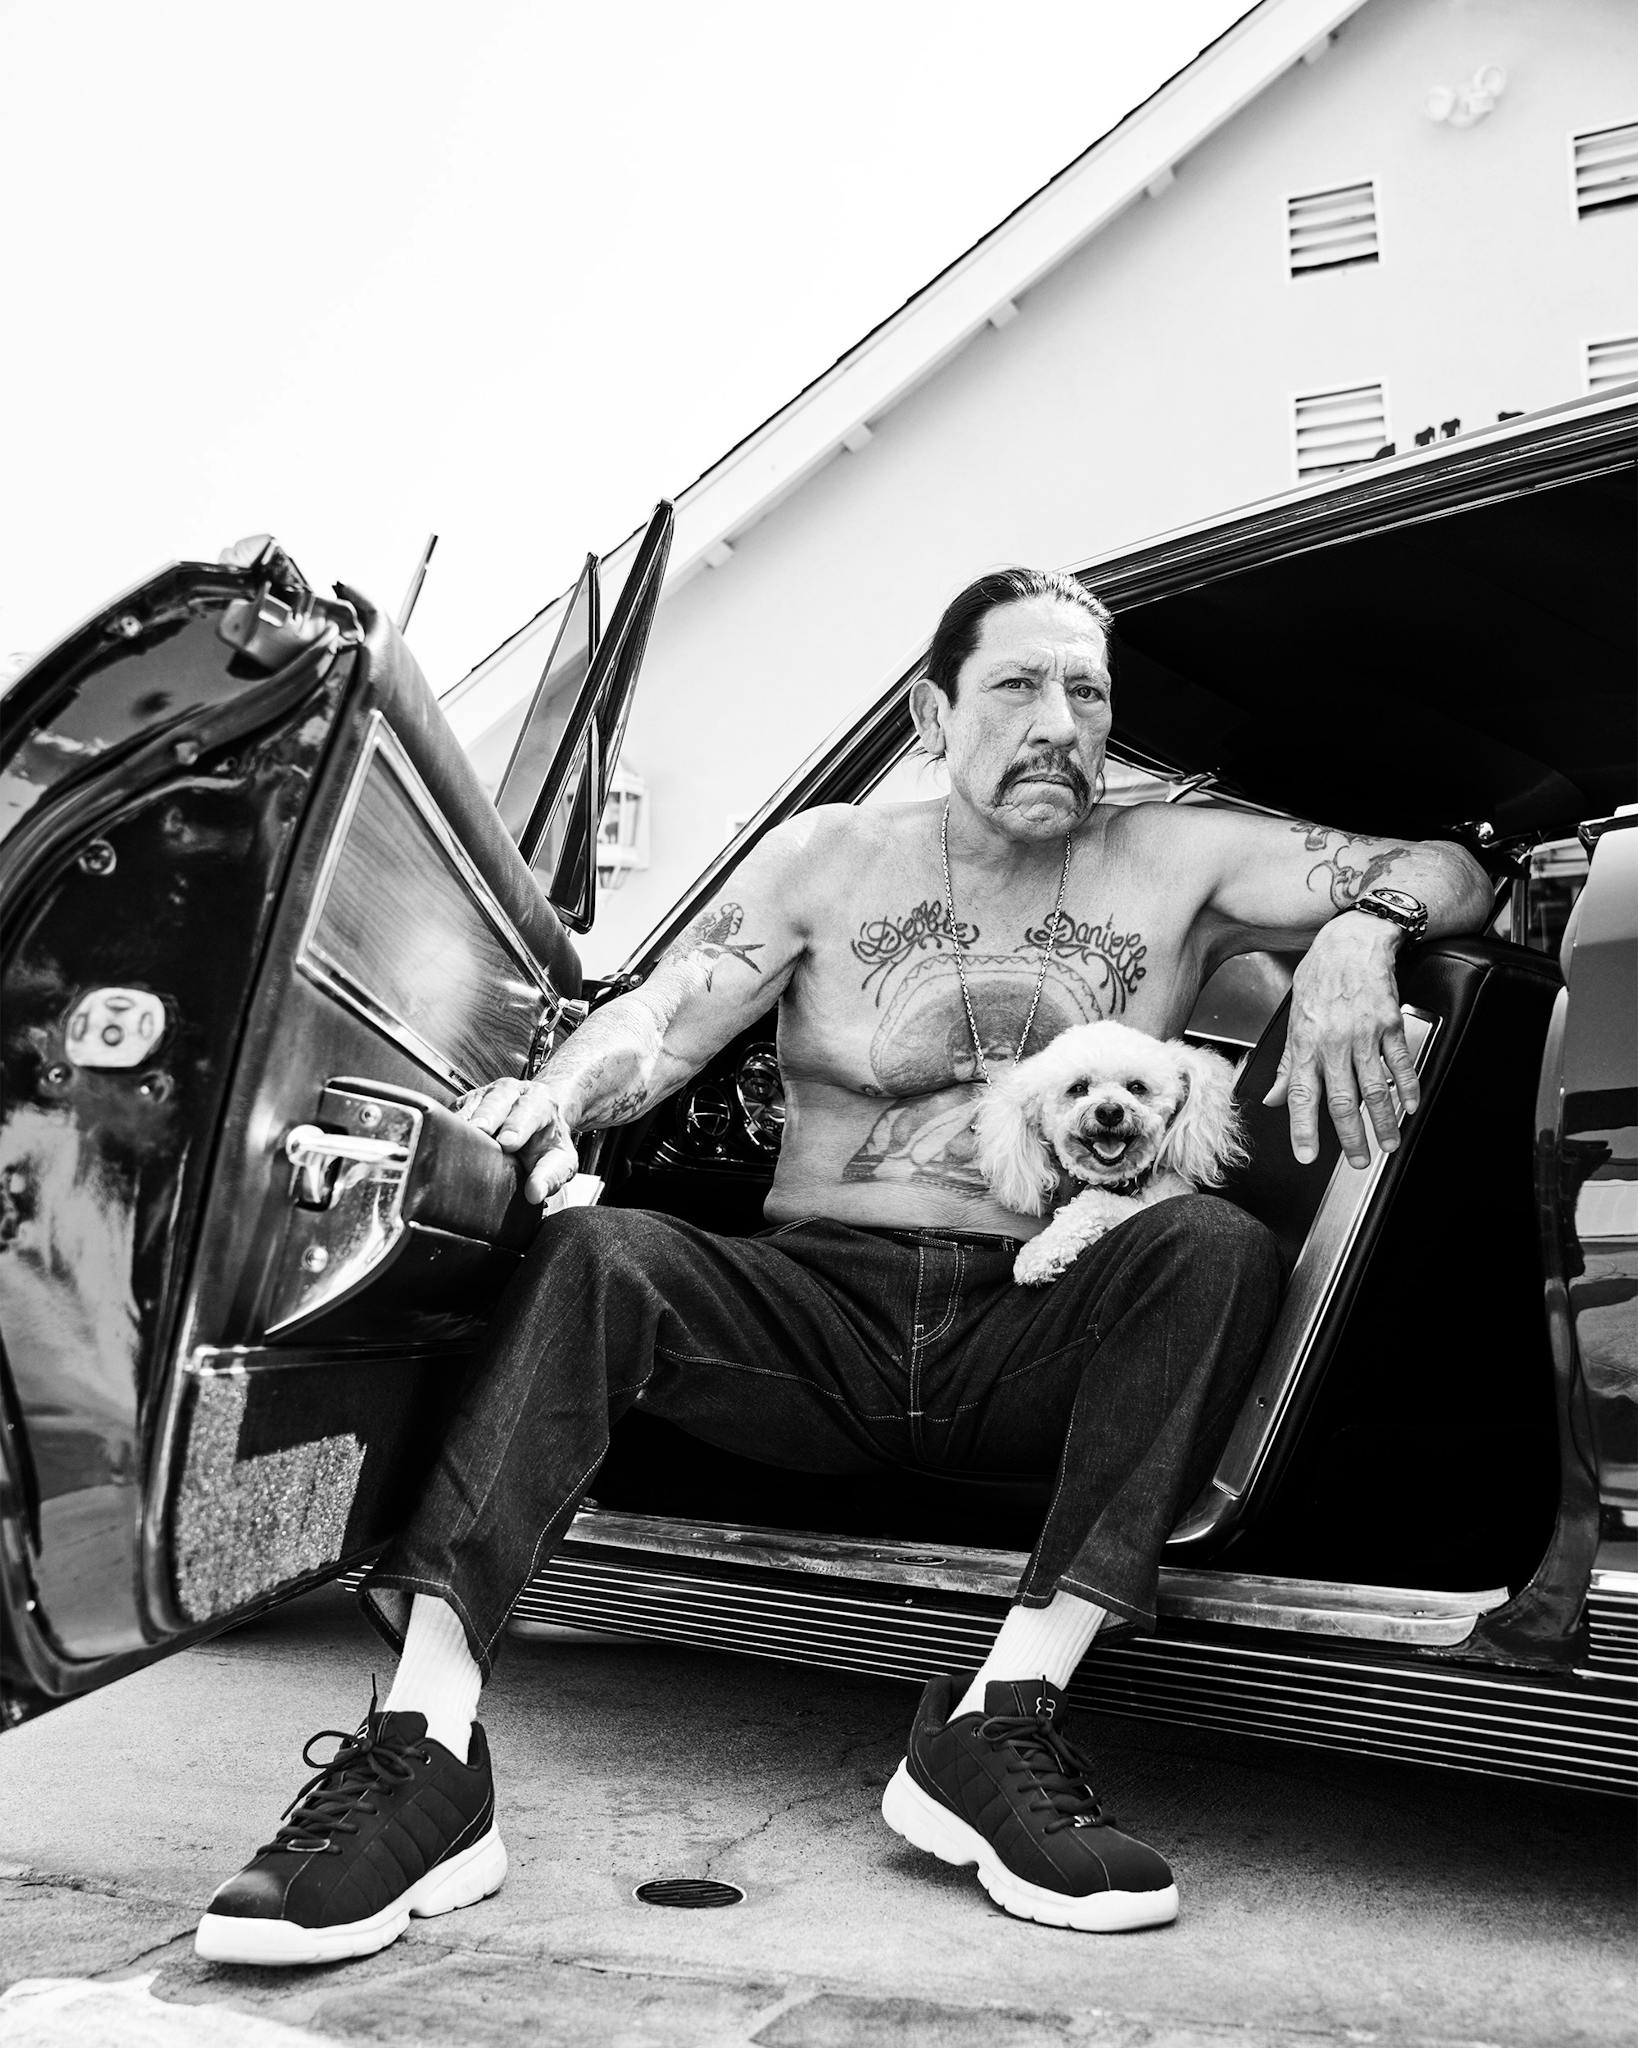 Danny Trejo and one of his dogs, Zelda, outside his home in Mission Hills, California.